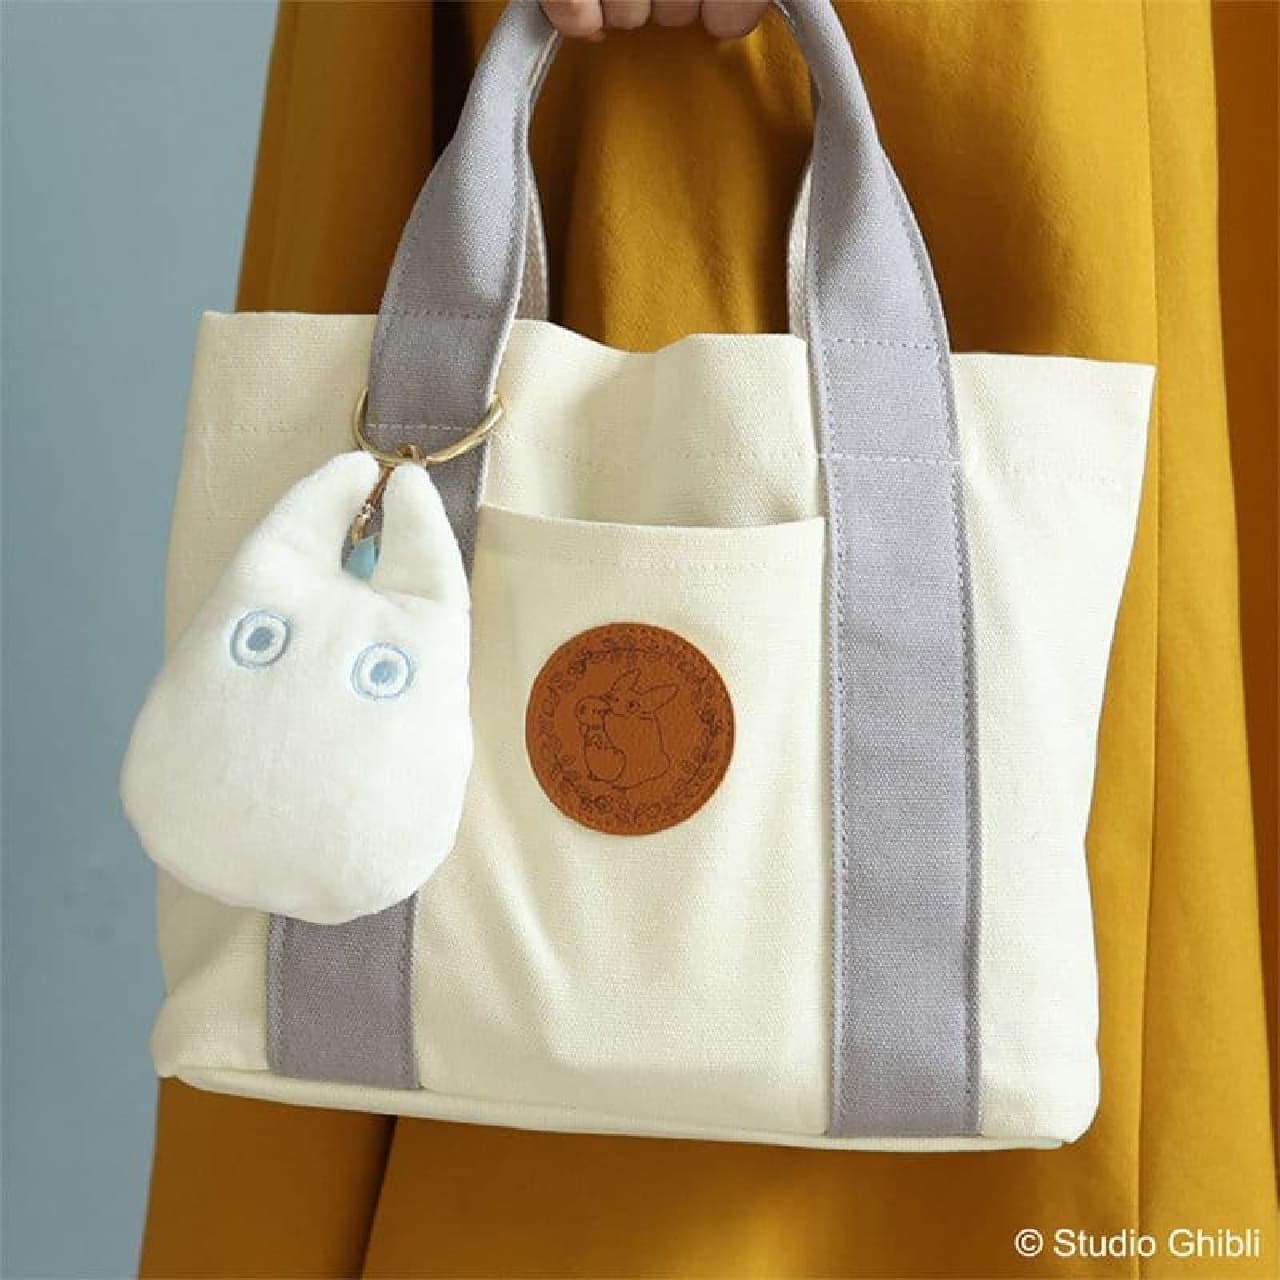 Post Office "My Neighbor Totoro Daily Goods Collection